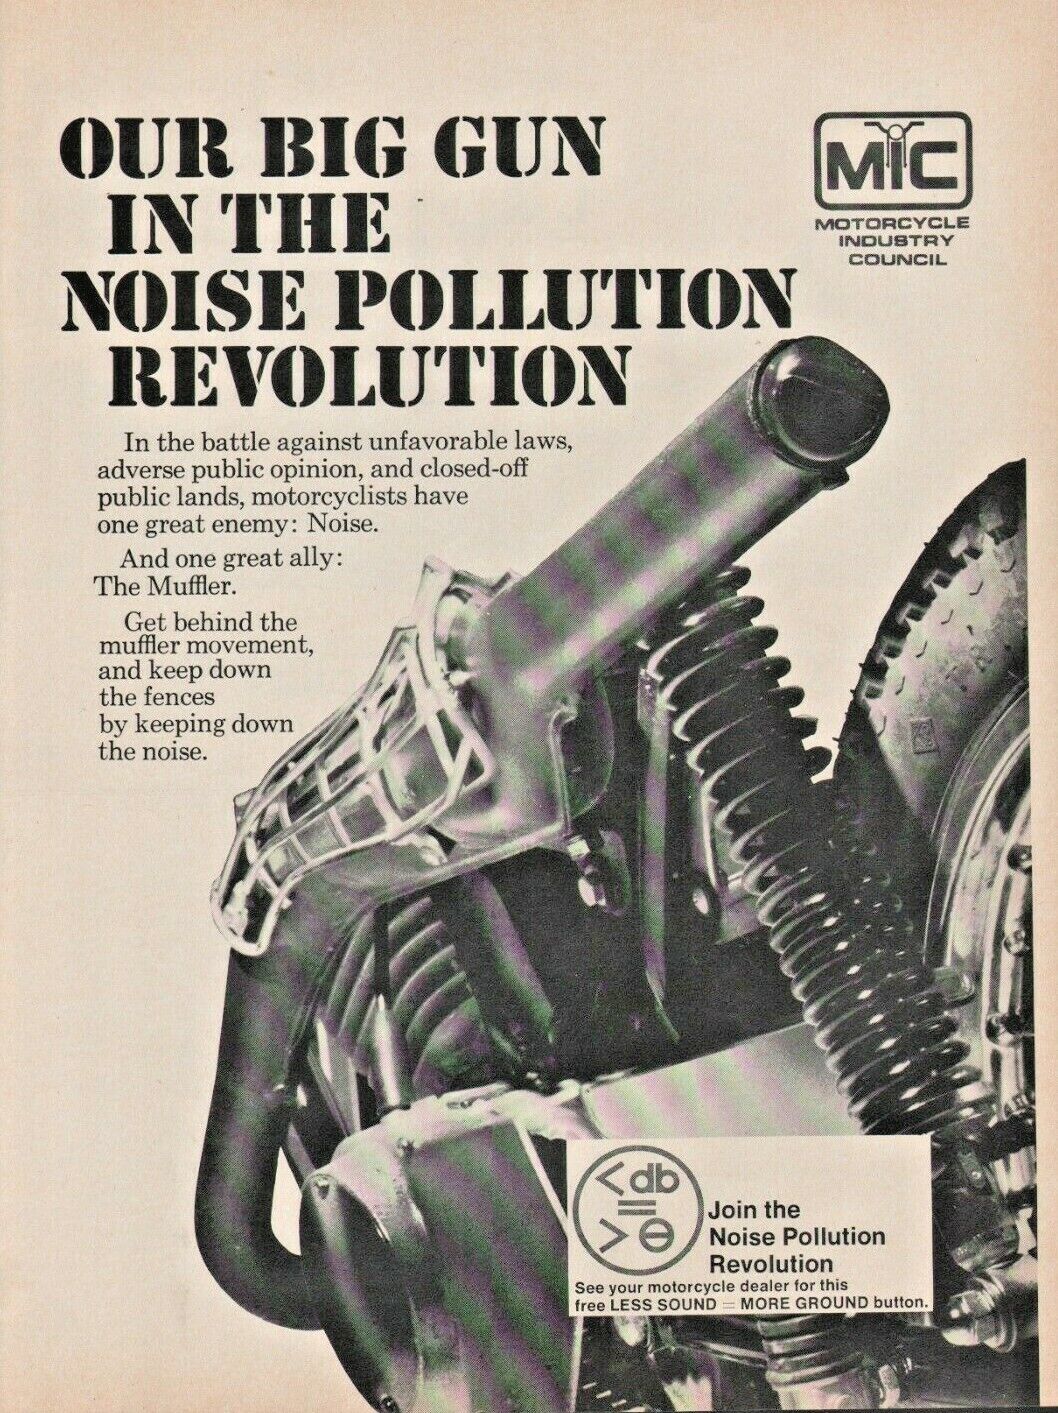 1971 Noise Pollution Muffler Motorcycle Industry Council - Vintage Advertisement